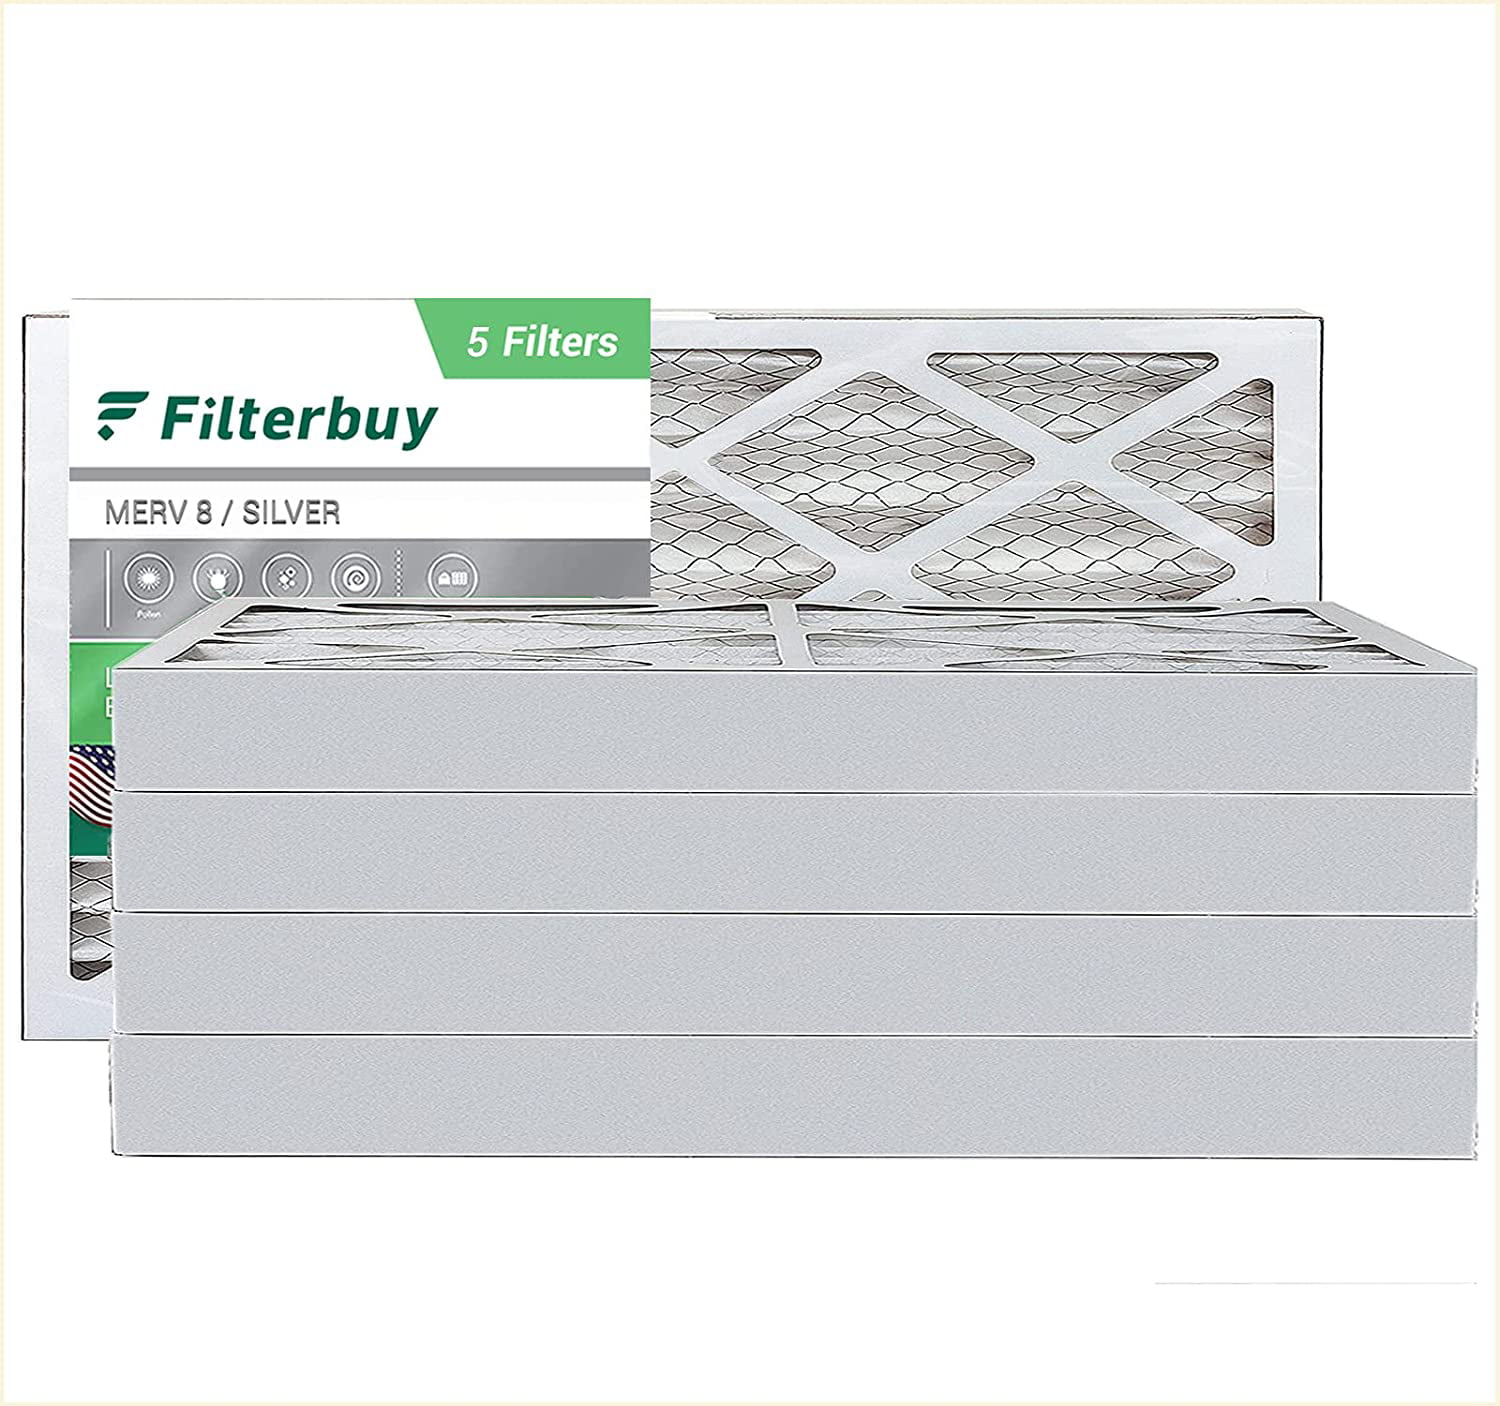 FilterBuy 12x24x4 MERV 8 Pleated AC Furnace Air Filter, 12x24x4 Silver Pack of 12 Filters 